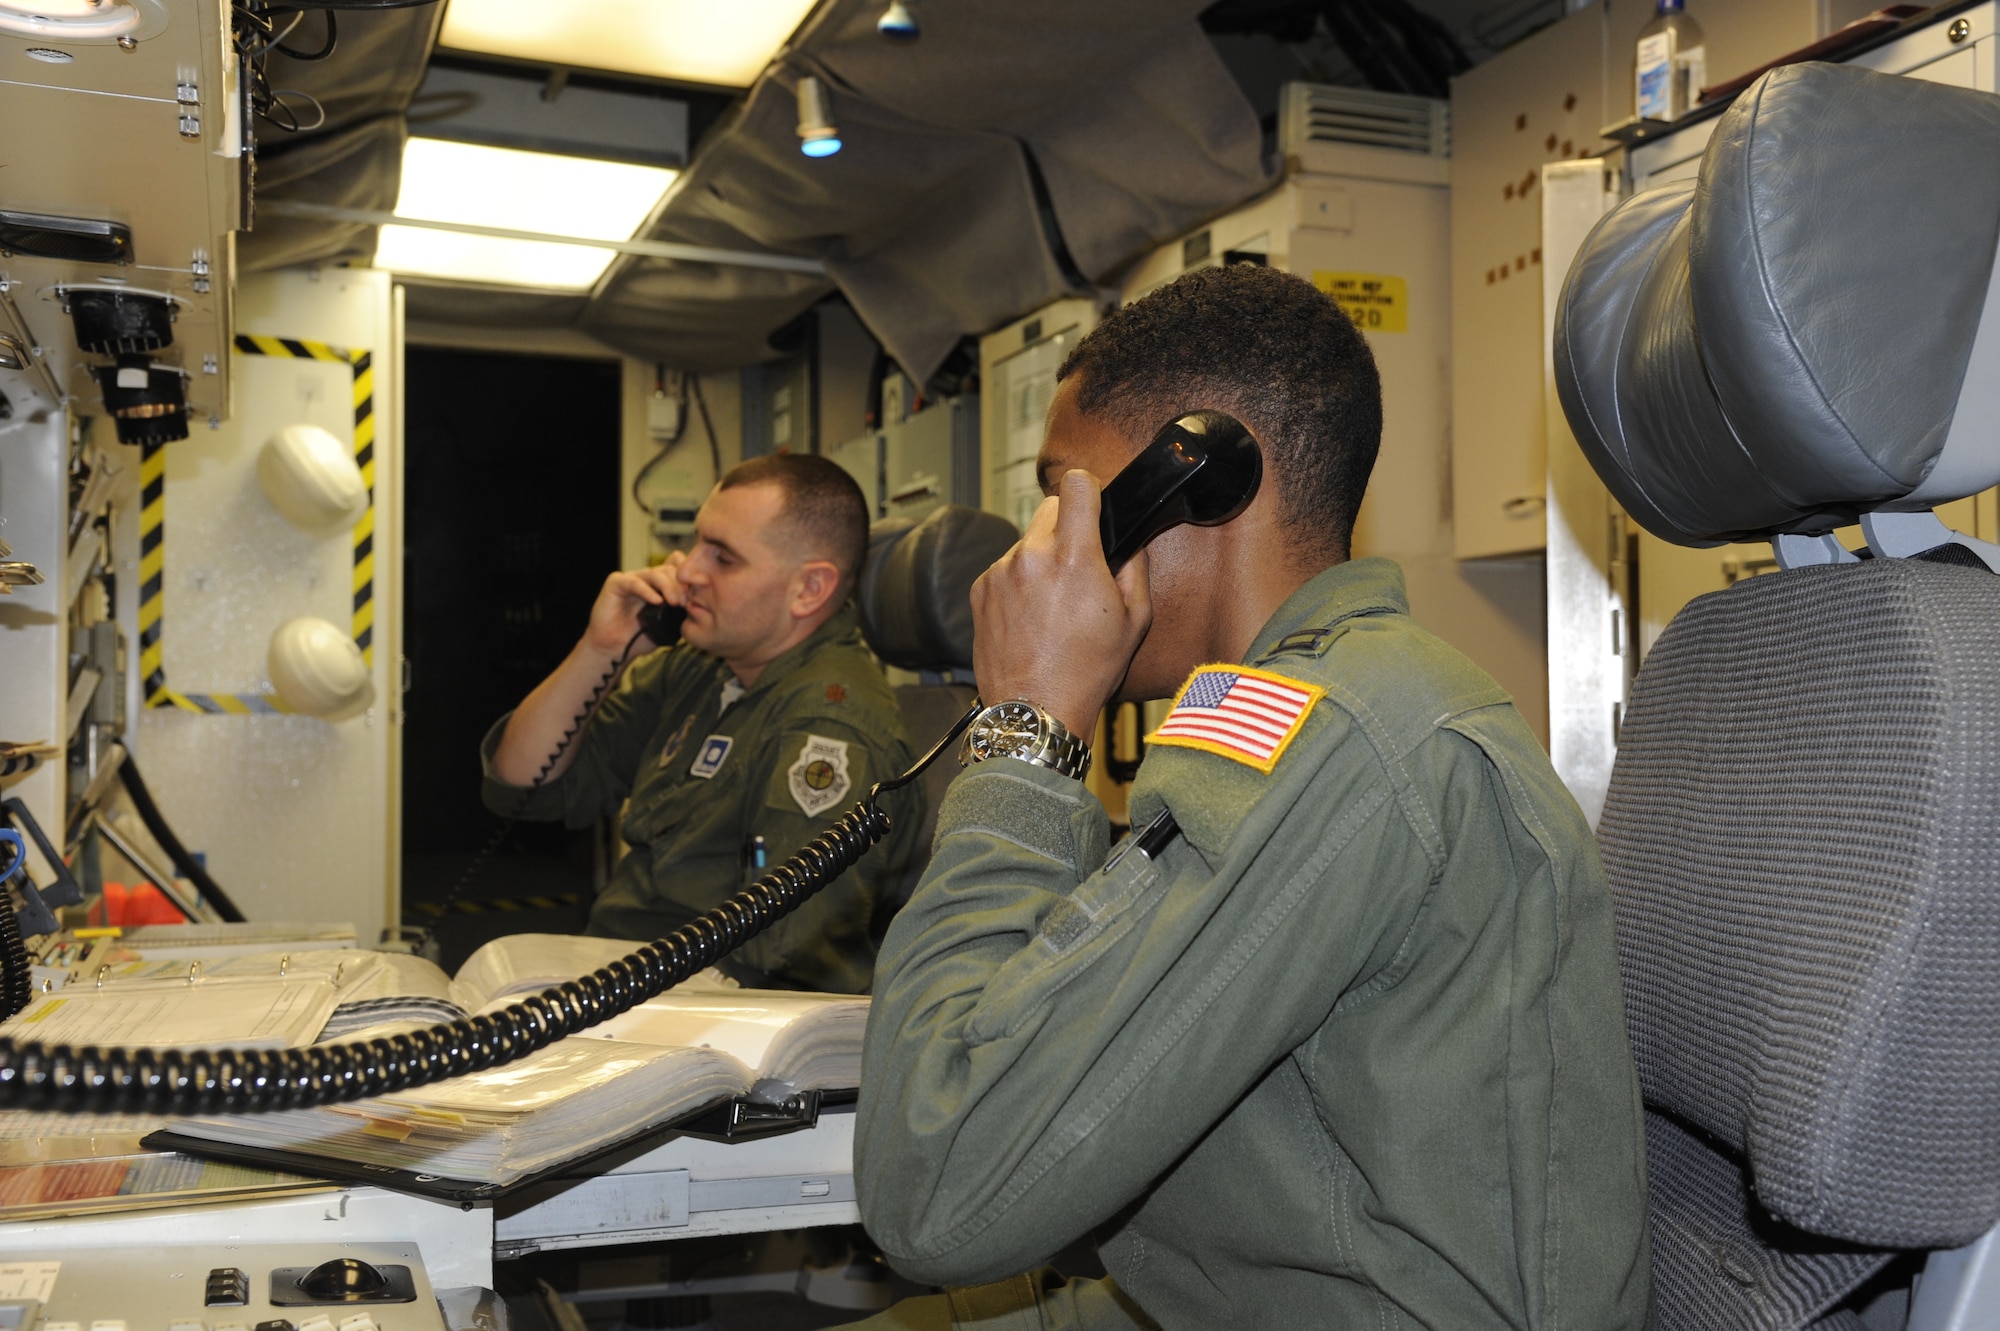 Capt. Javon Quarles, 321st Missile Squadron mission combat crew commander, takes a phone call from the flight security controller during his second alert as an IMA. Quarles served 4 years on active duty with the 321st MS and transitioned into the Air Force Reserve earlier this year. (U. S. Air Force photo by Glenn S. Robertson)